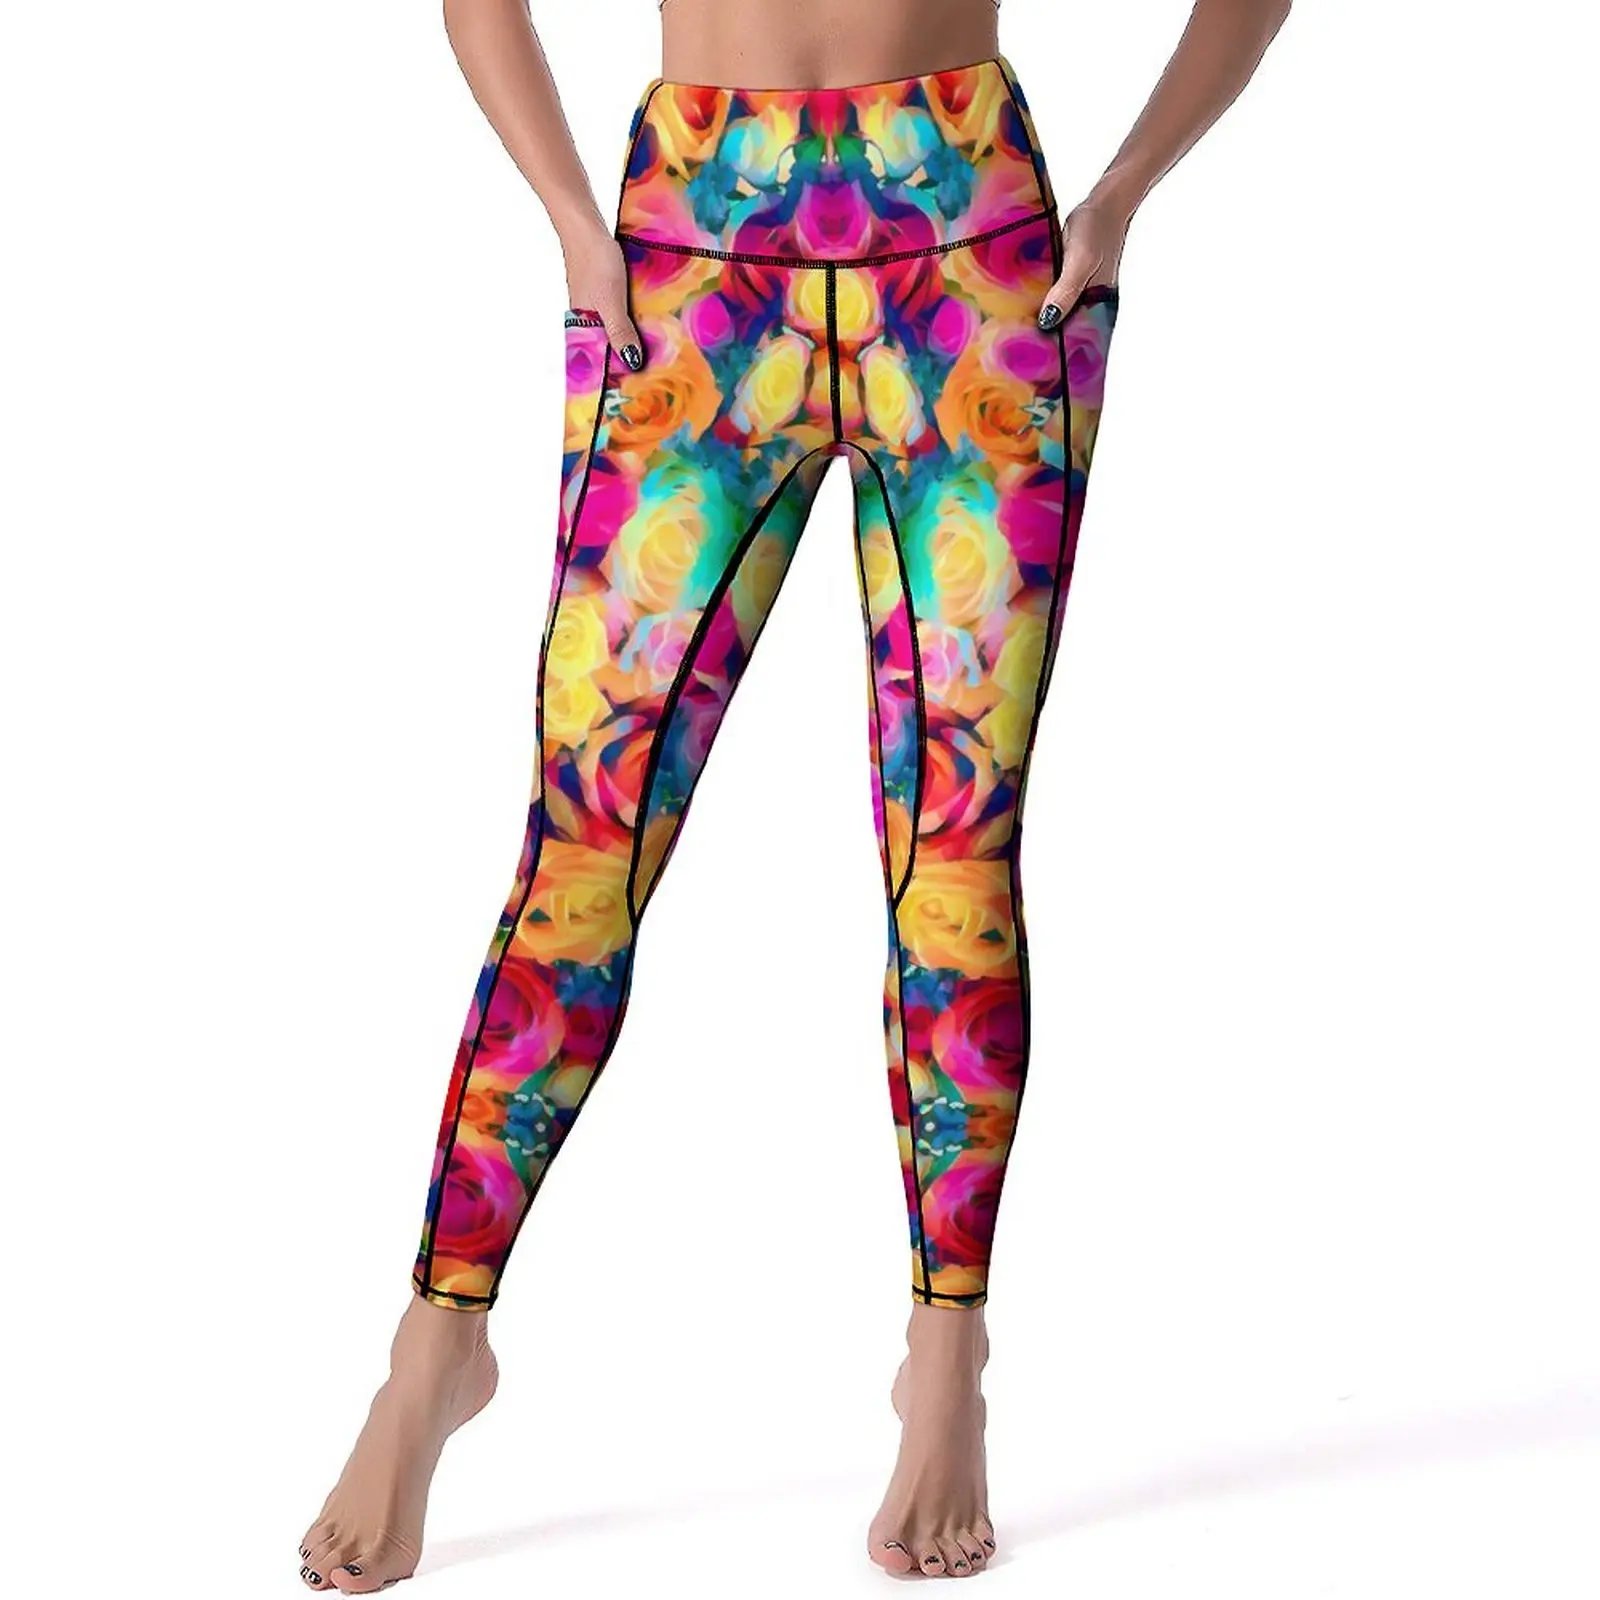 

Colorful Rose Yoga Pants With Pockets Bouquet Print Leggings Sexy High Waist Casual Yoga Sports Tights Stretch Work Out Leggins